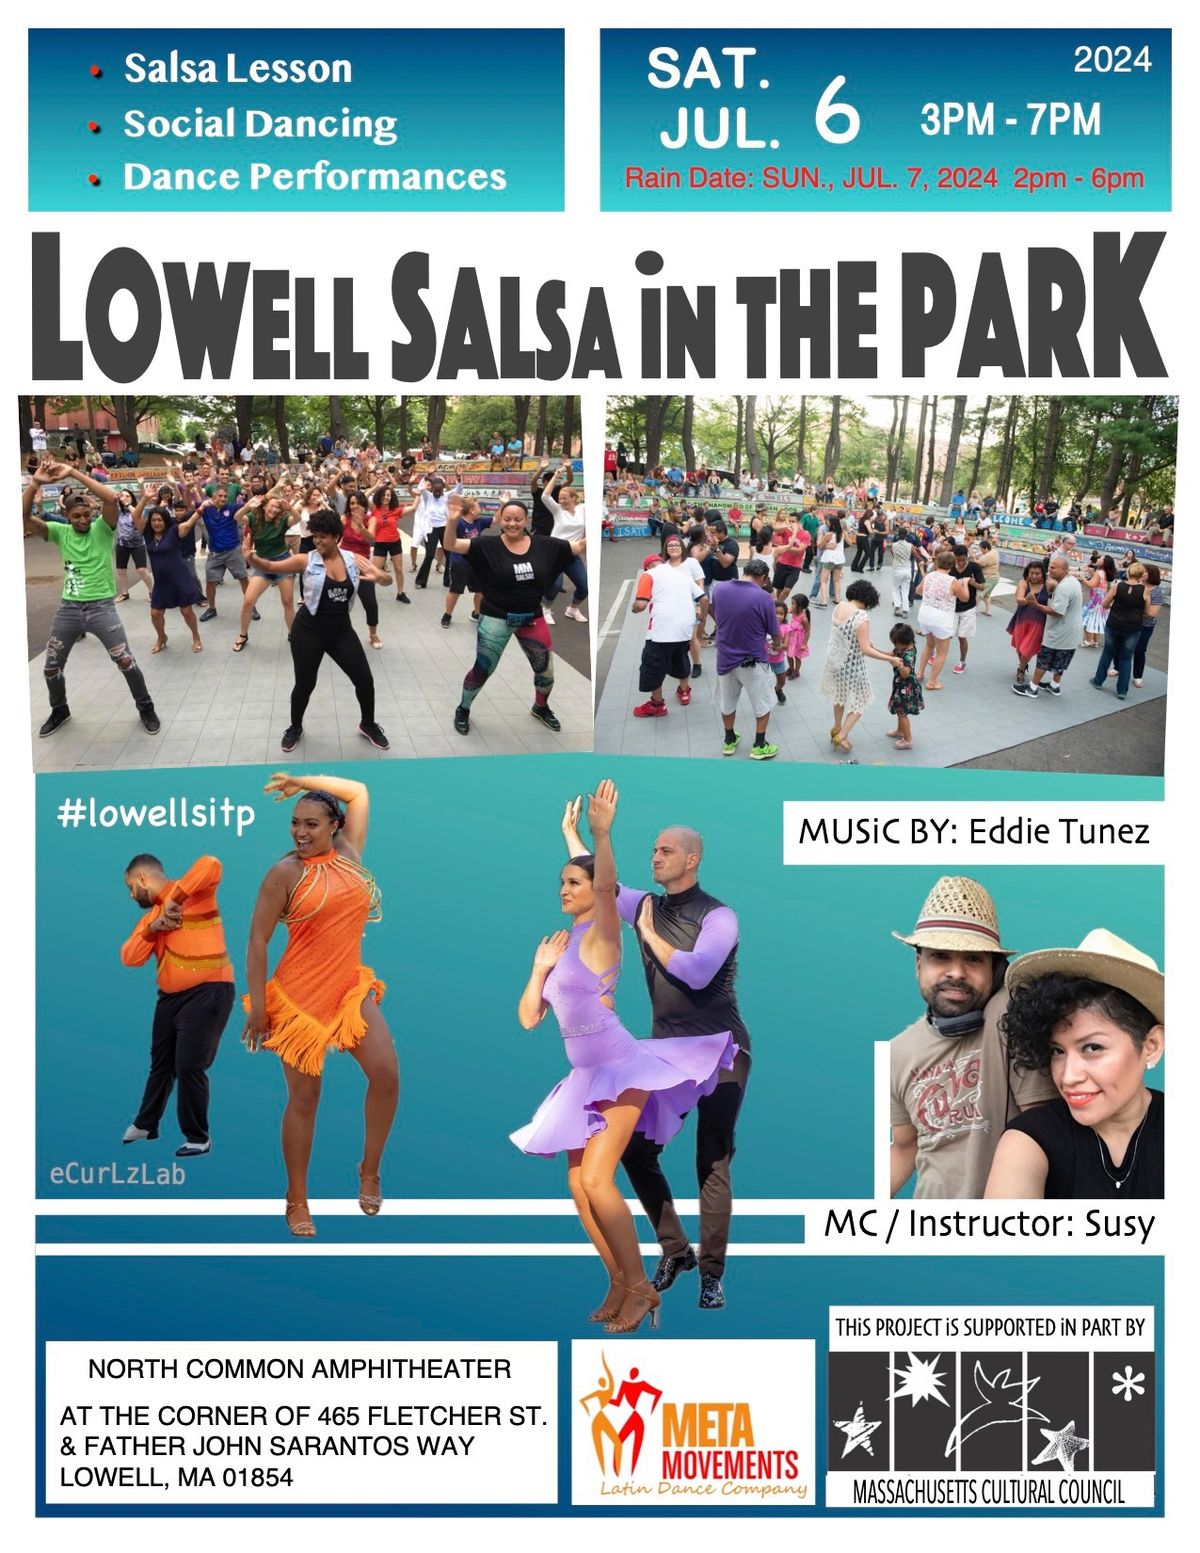 Lowell Salsa In The Park